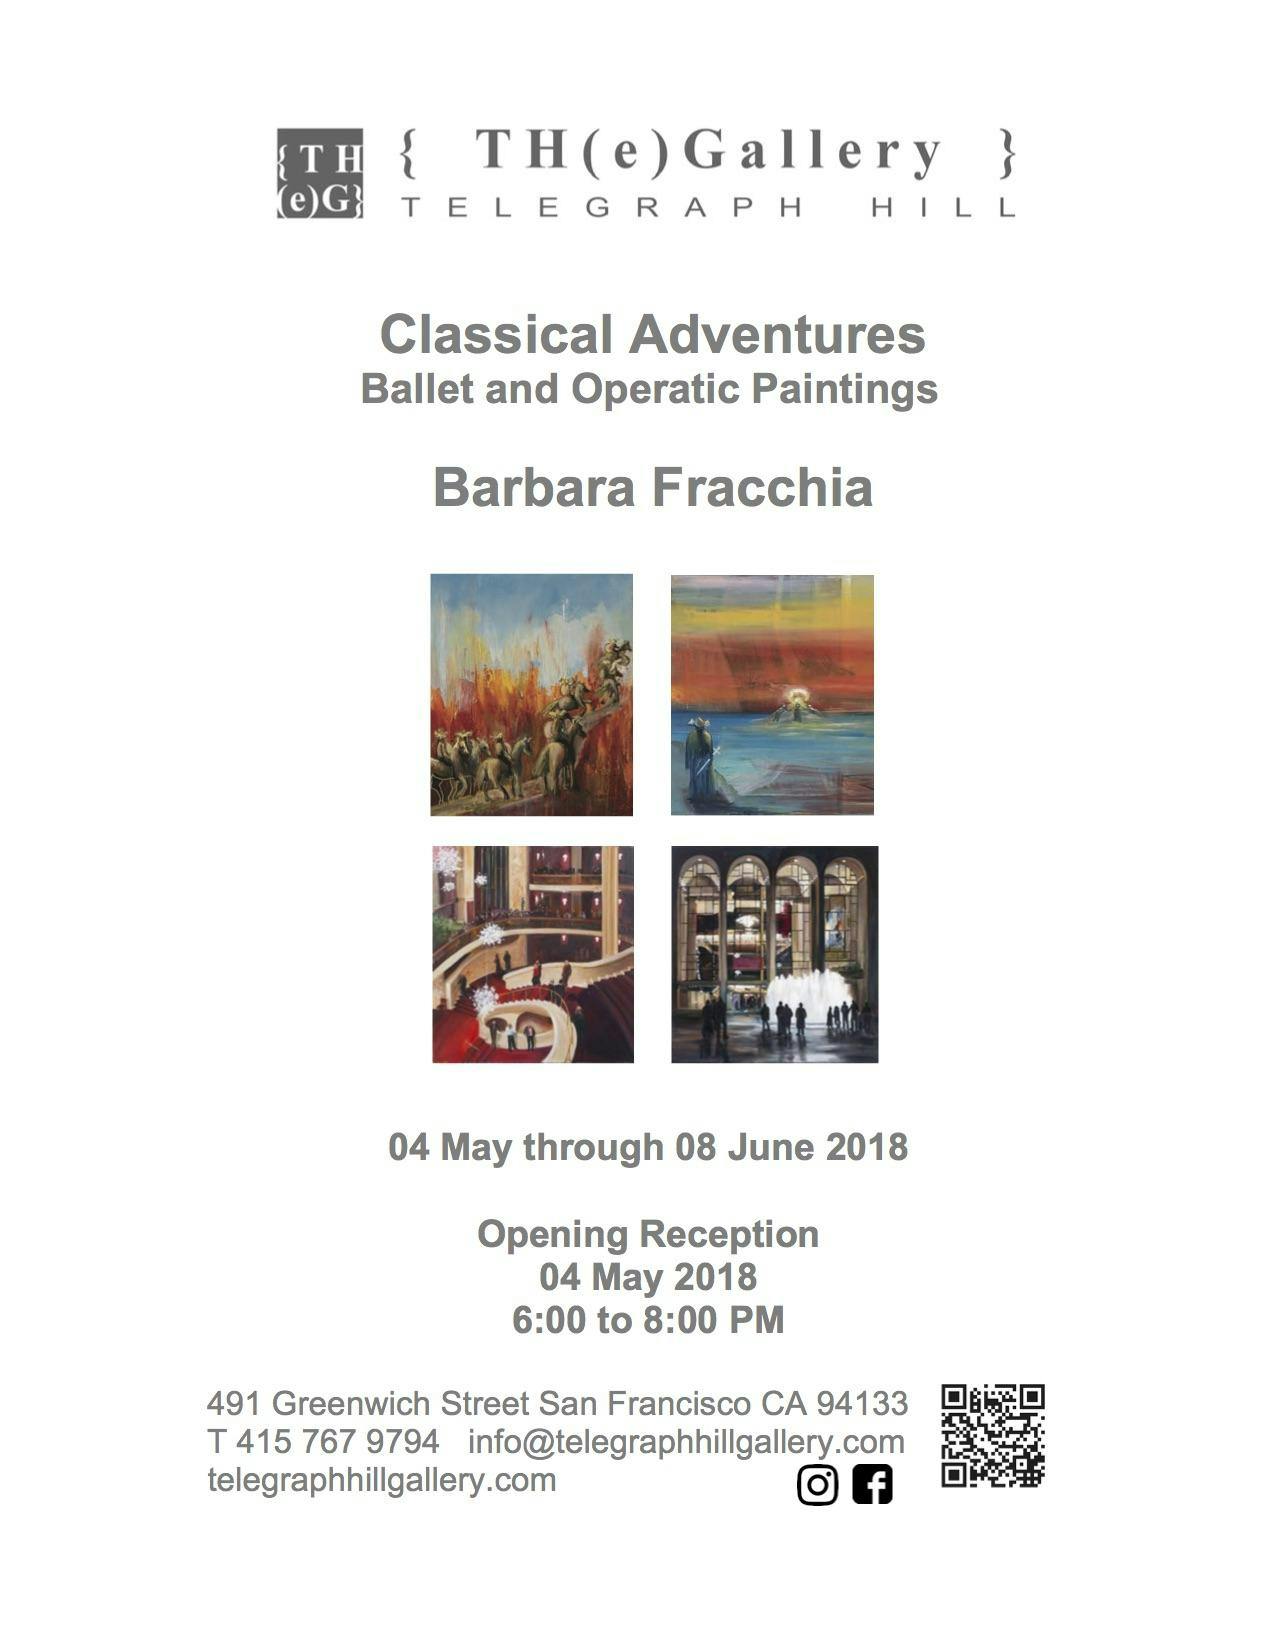 Classical Adventures Ballet and Operatic Paintings at the Telegraph Hill Gallery